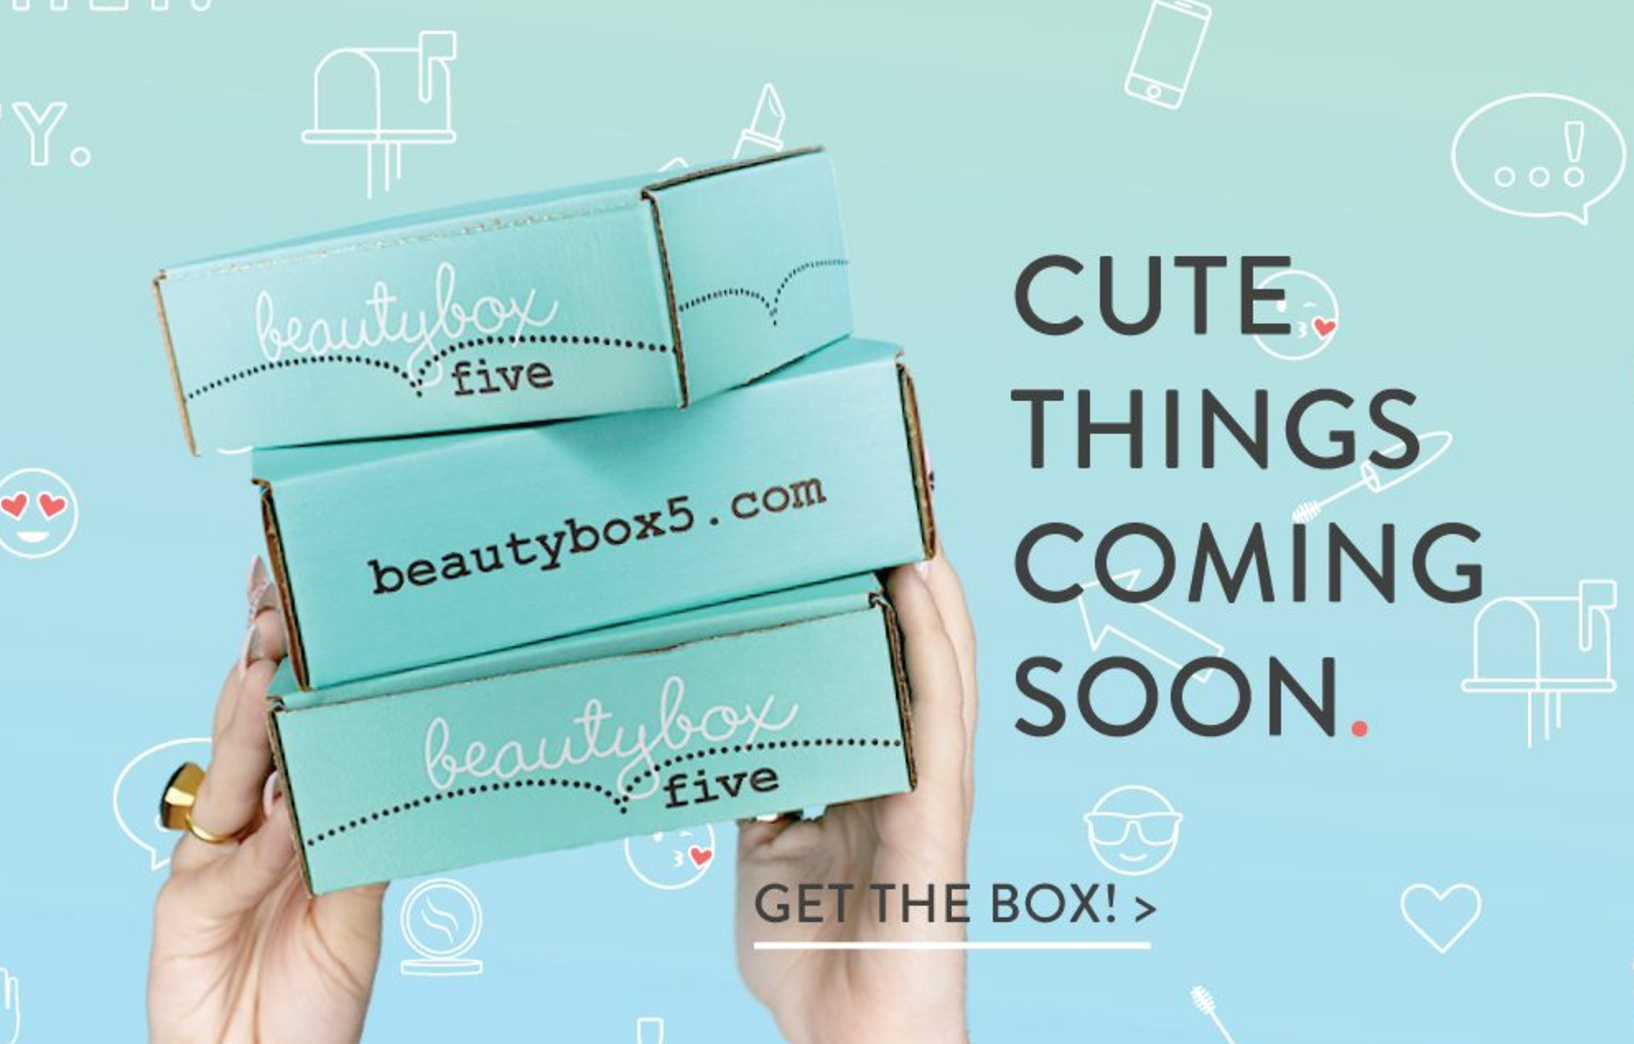 Beauty Box 5 Coupon – FREE Eyeliner With Your First Box!